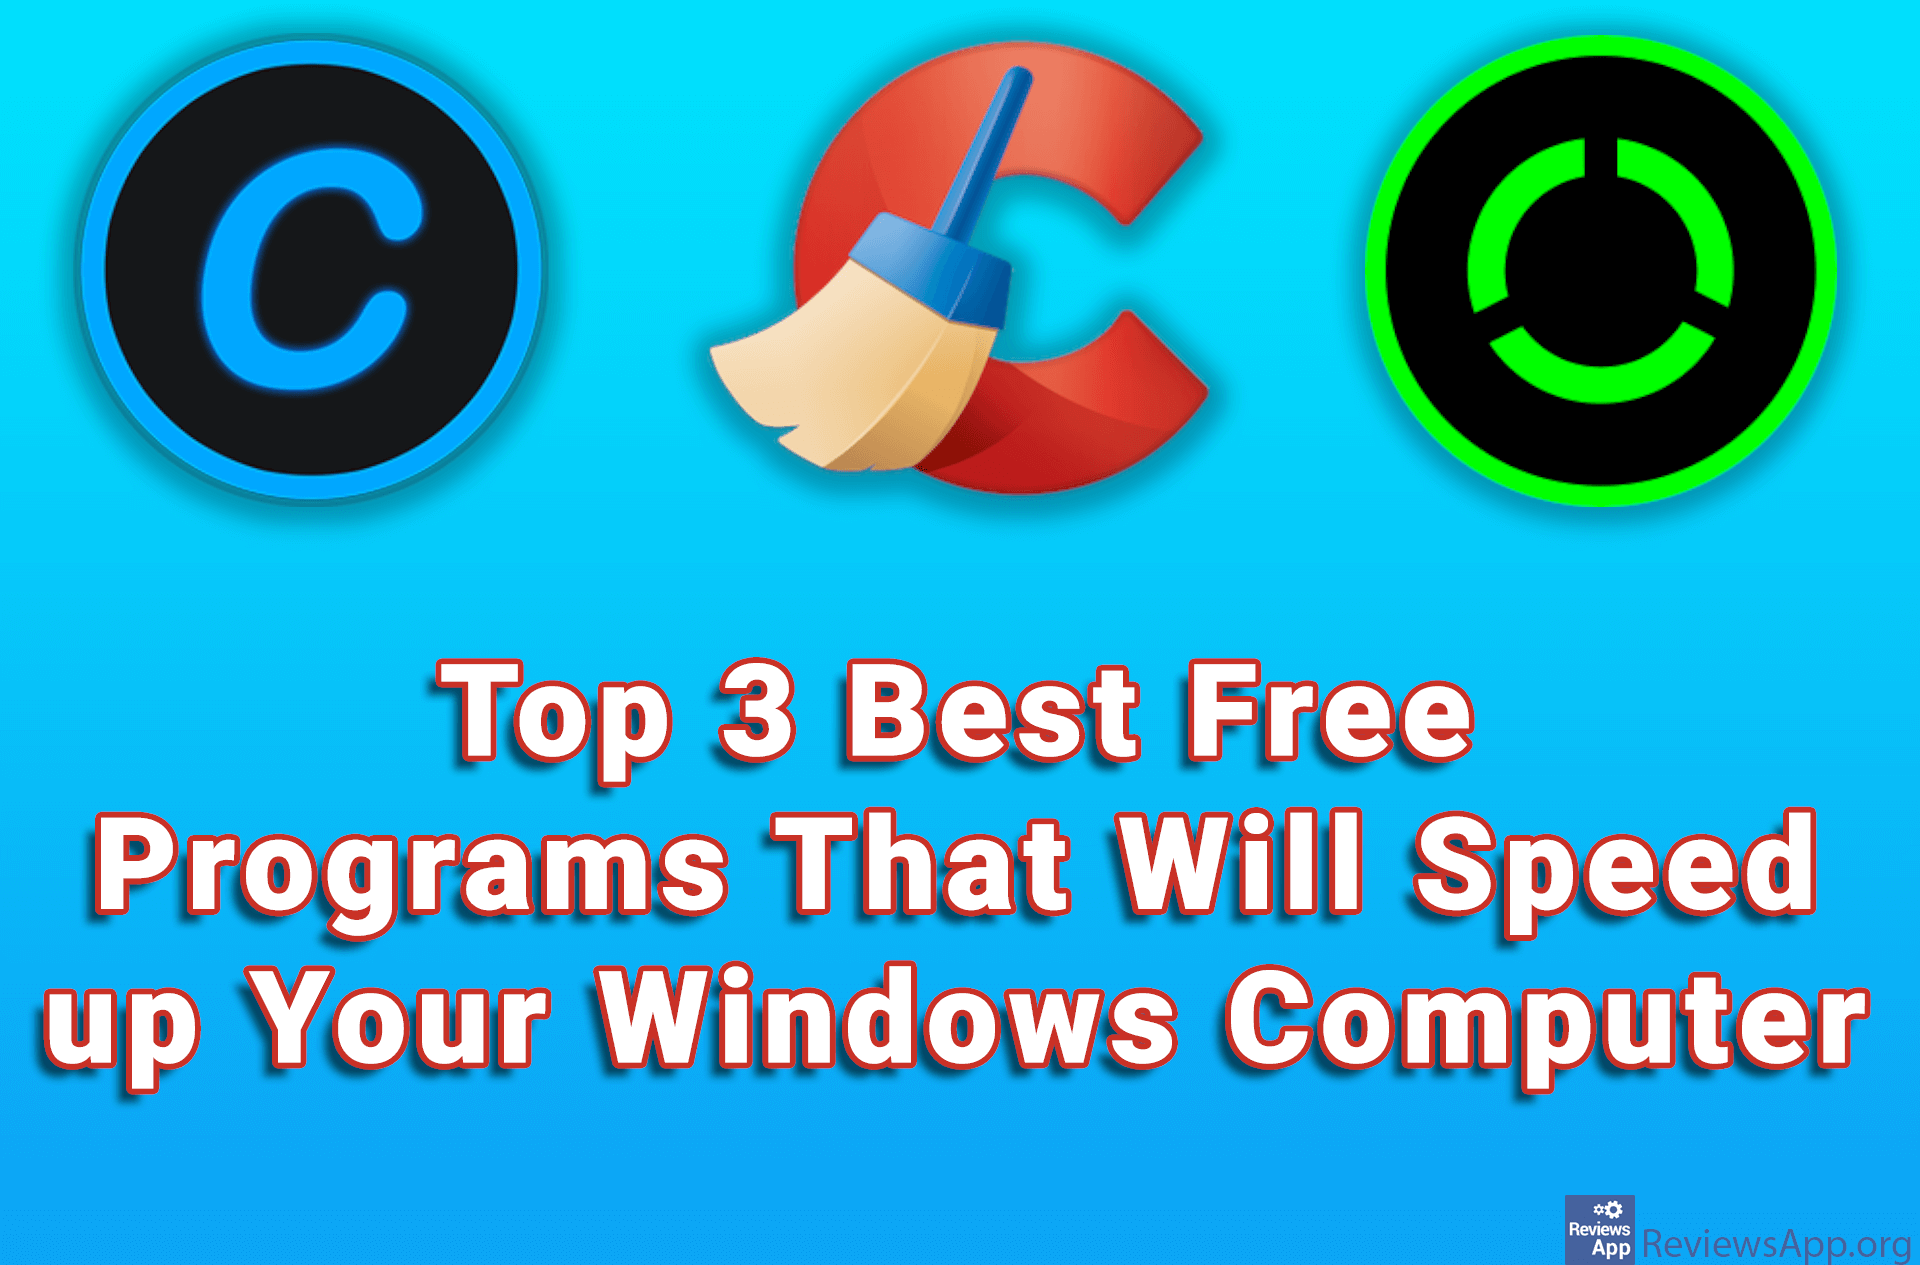 Top 3 Best Free Programs That Will Speed up Your Windows Computer